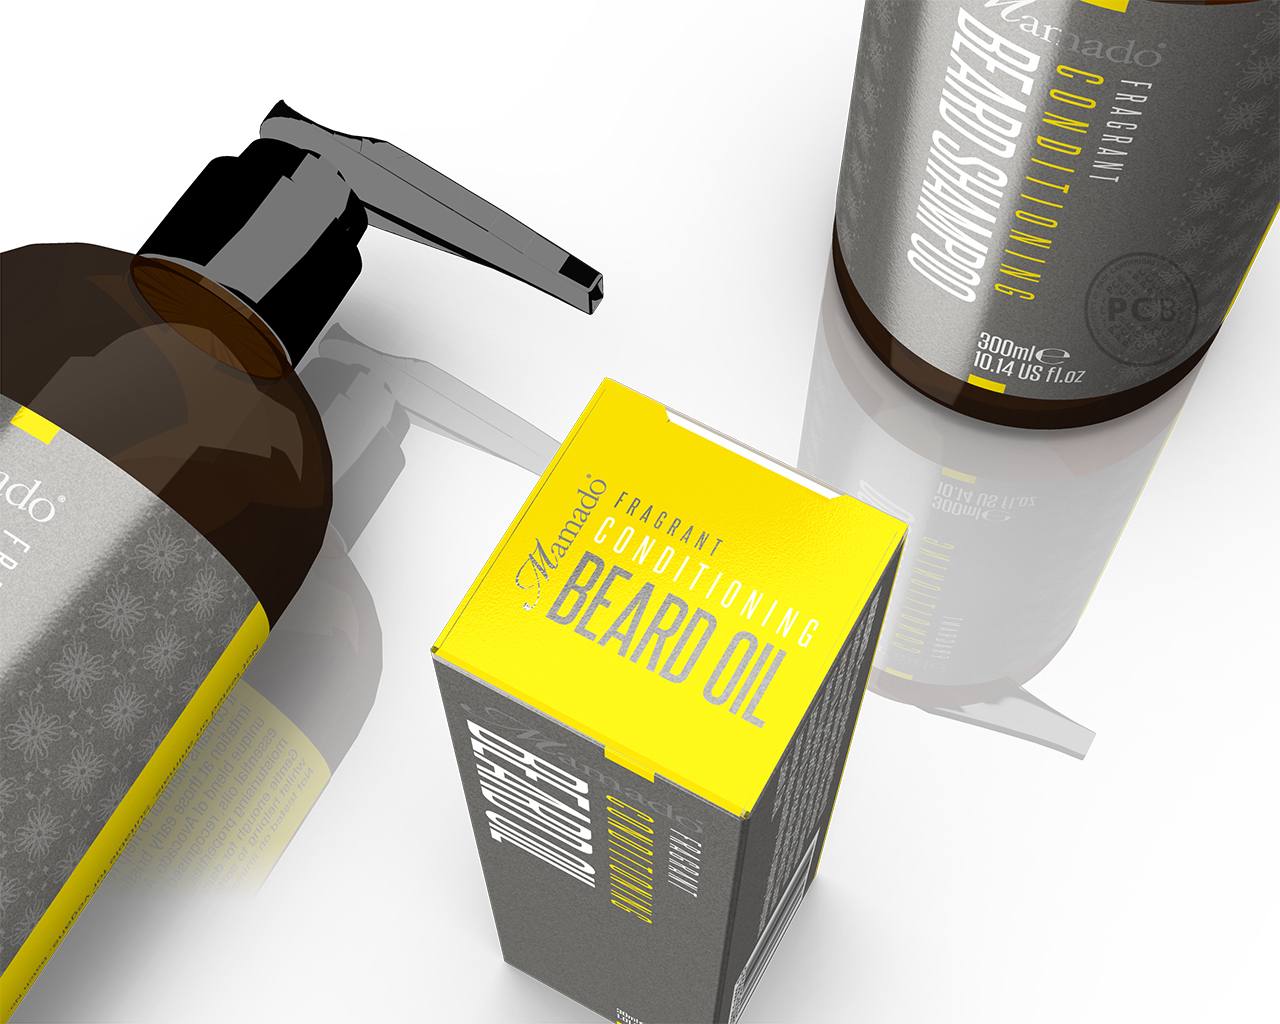 Men's face and beard care oil product packaging design identity, labelling and carton graphics by Paul Cartwright Branding.